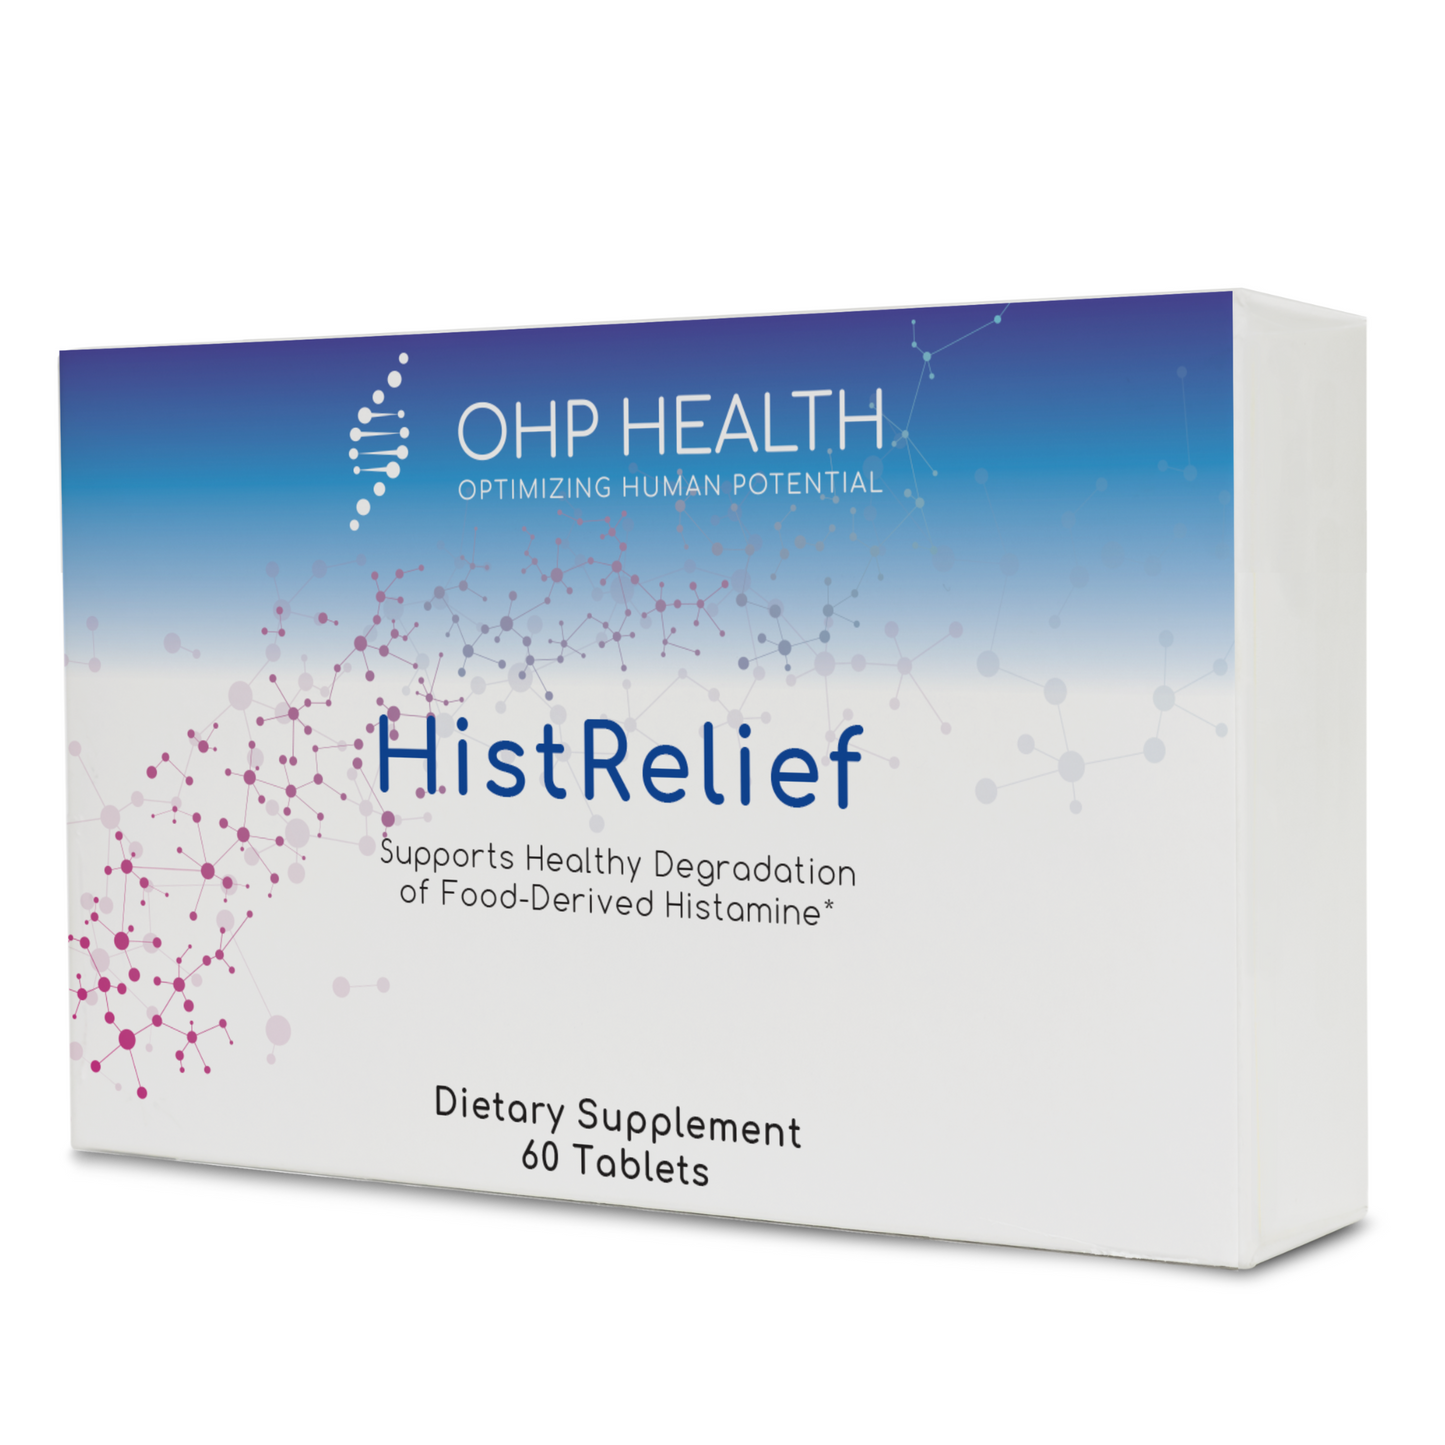 Box of HistRelief dietary supplement by OHP Health, containing 60 gastro-resistant mini-tablets, designed to support healthy digestion of food-derived histamine.